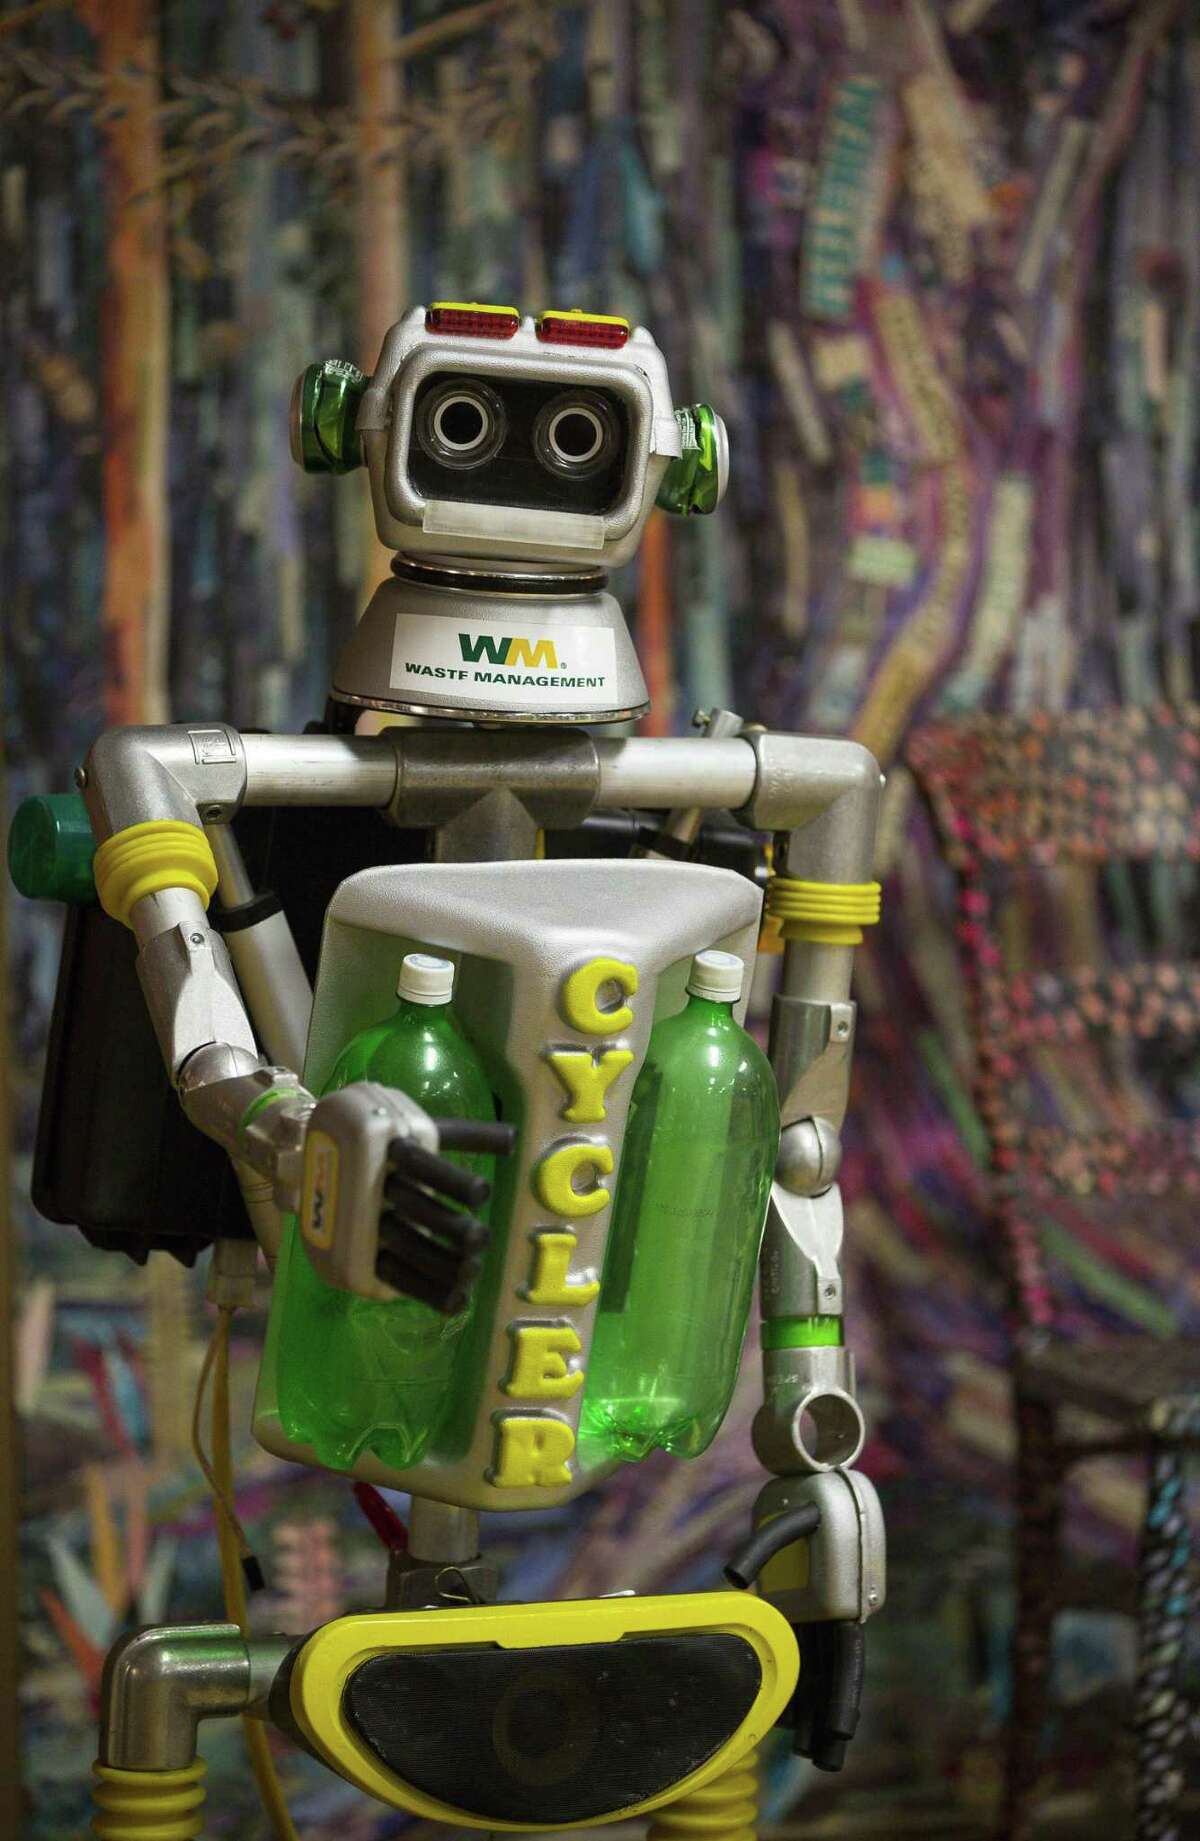 This photo taken Nov. 19, 2018, shows a motorized robot made from recycled materials stands in an education room filled with art made from recycled materials at Waste Management's facility on Gasmer Drive in southwest Houston. ( Mark Mulligan /Houston Chronicle via AP)